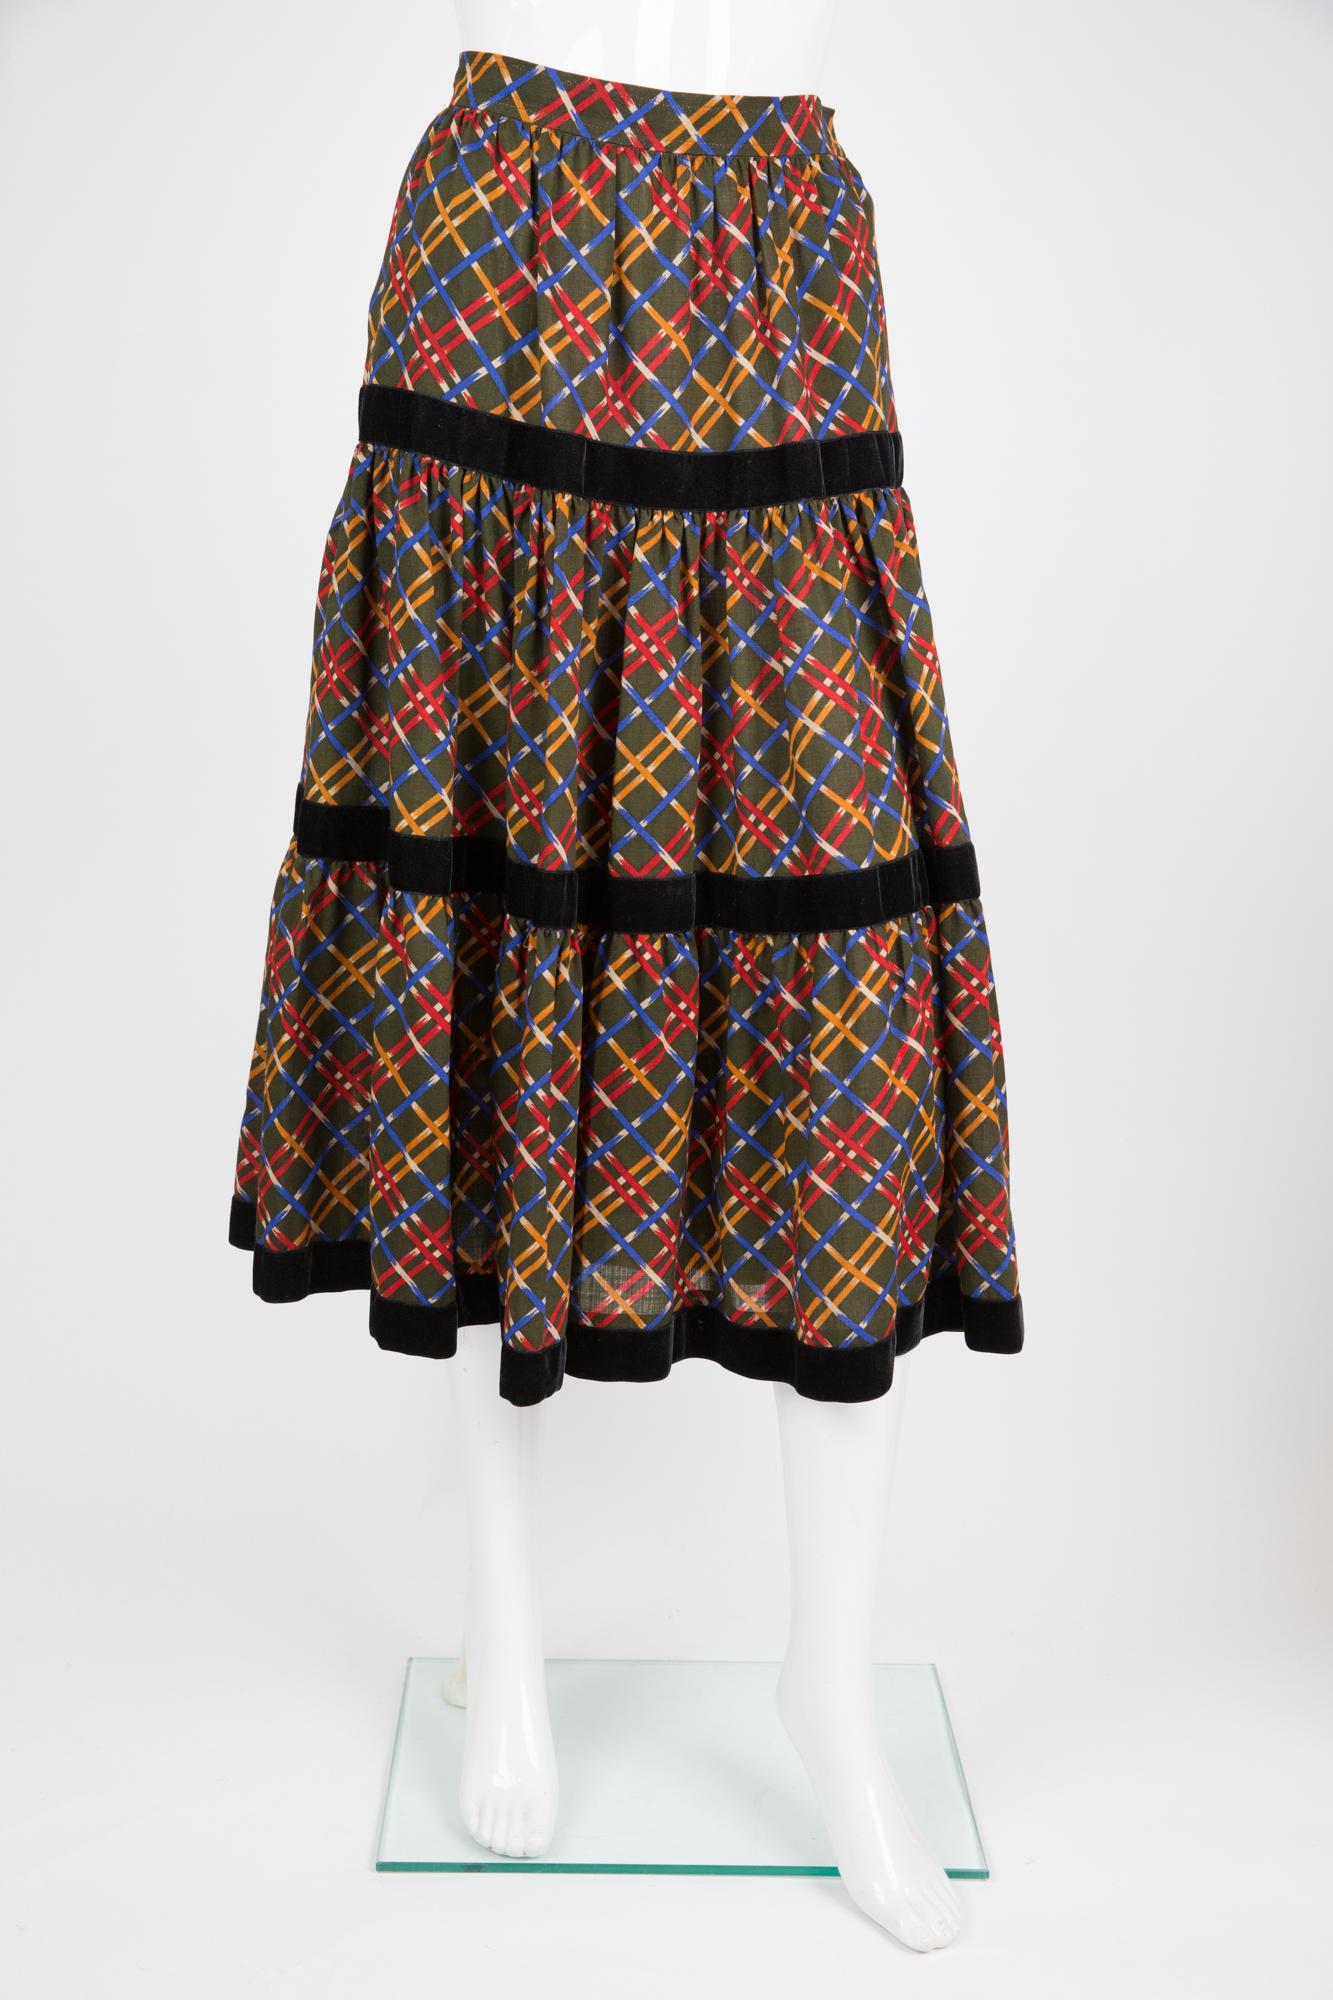 Iconic Yves Saint Laurent wool Russian Collection skirt featuring a check pattern, black velvet ribbon detail, sides pockets, side zip opening.
In excellent vintage condition. Made in France.
Estimated size: 40fr/US8/UK12
Composition: virgin wool